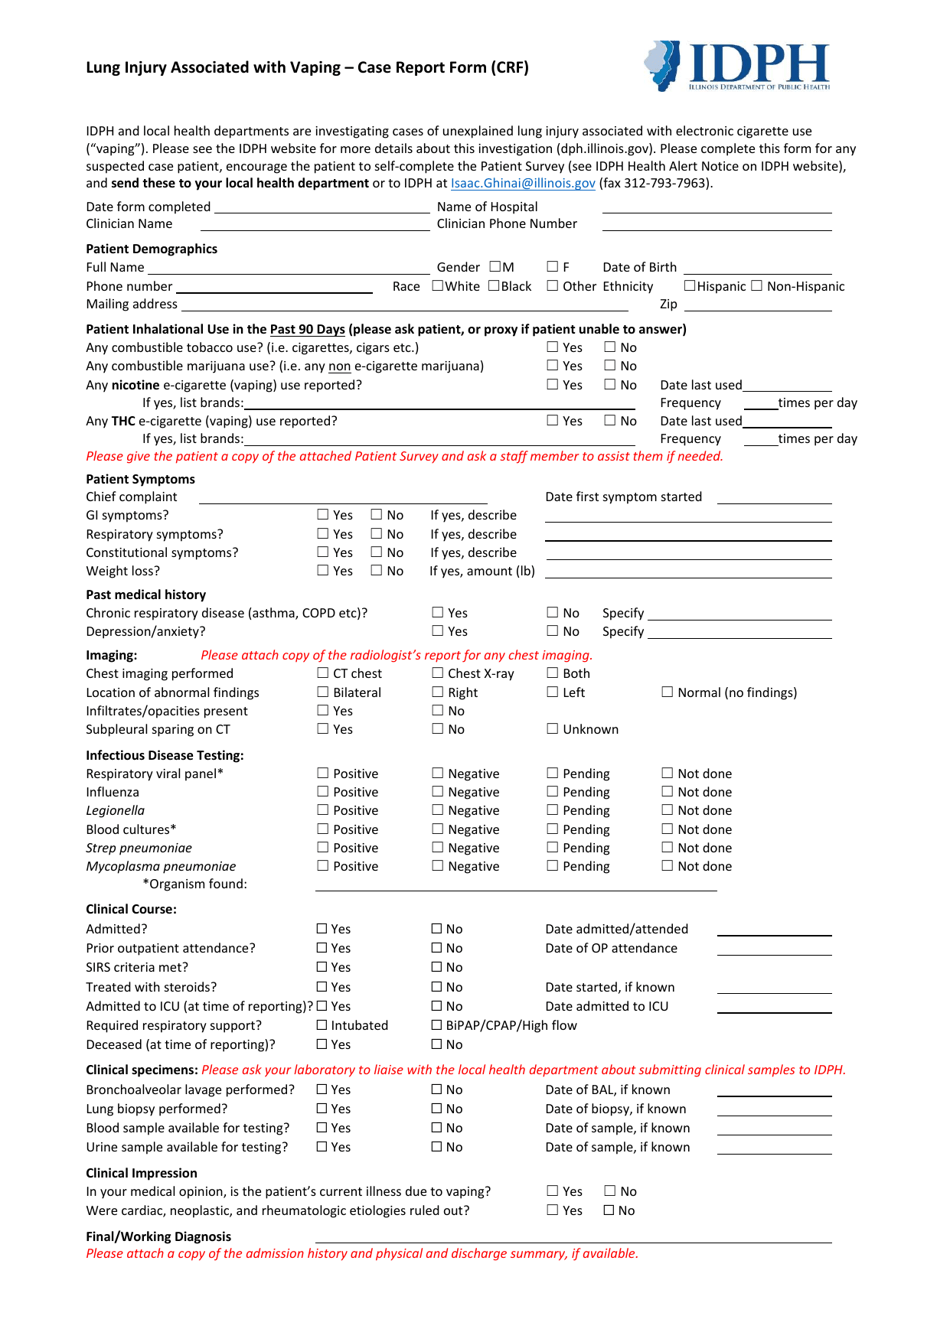 Lung Injury Associated With Vaping - Case Report Form (Crf) - Illinois, Page 1